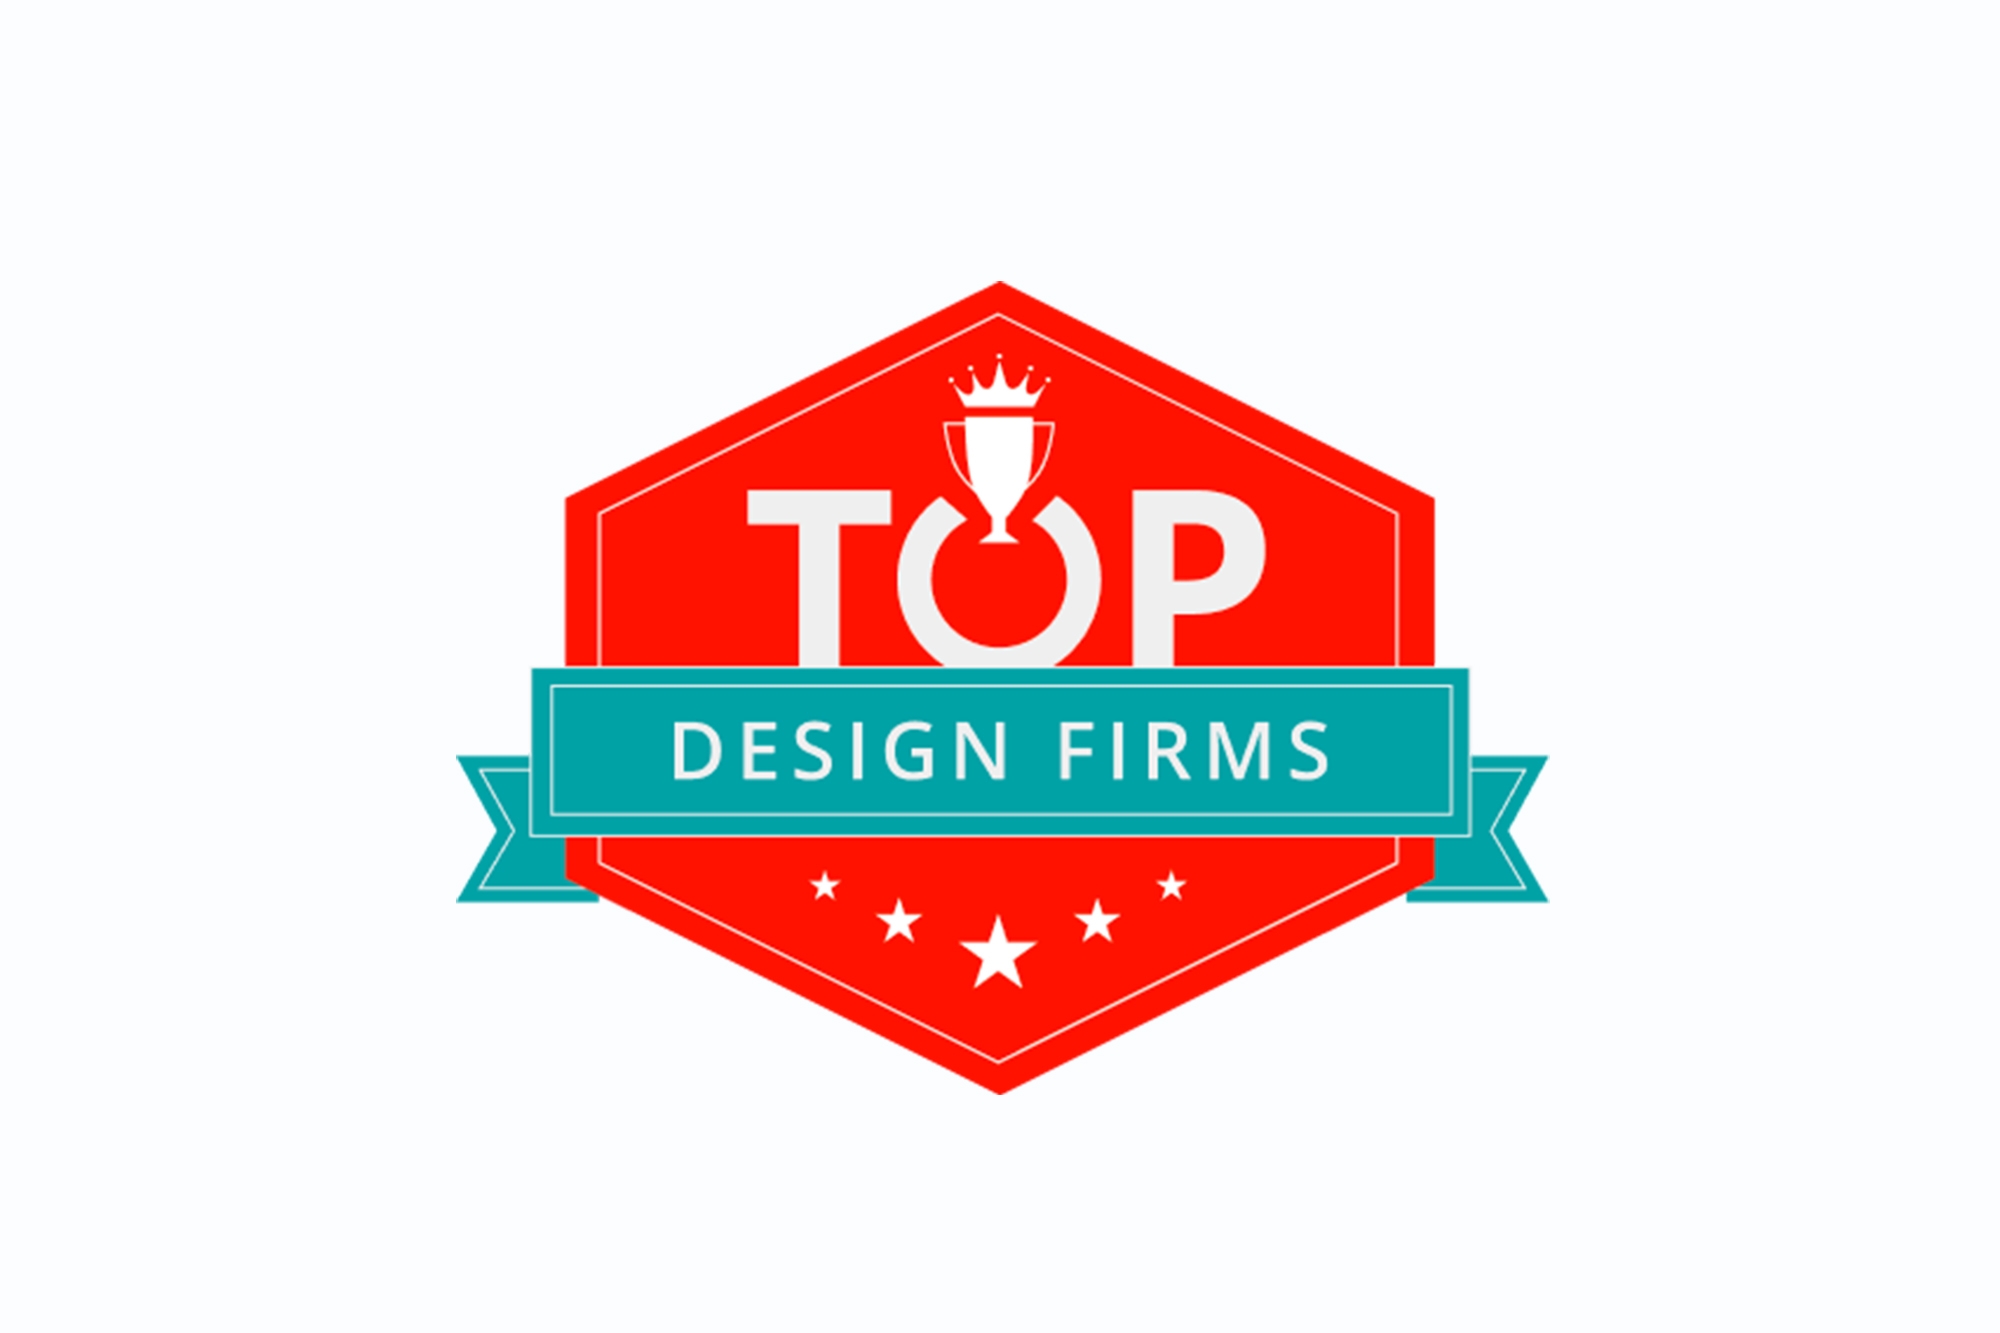 Tribox Design Teams Up with Newest B2B Site Top Design Firms